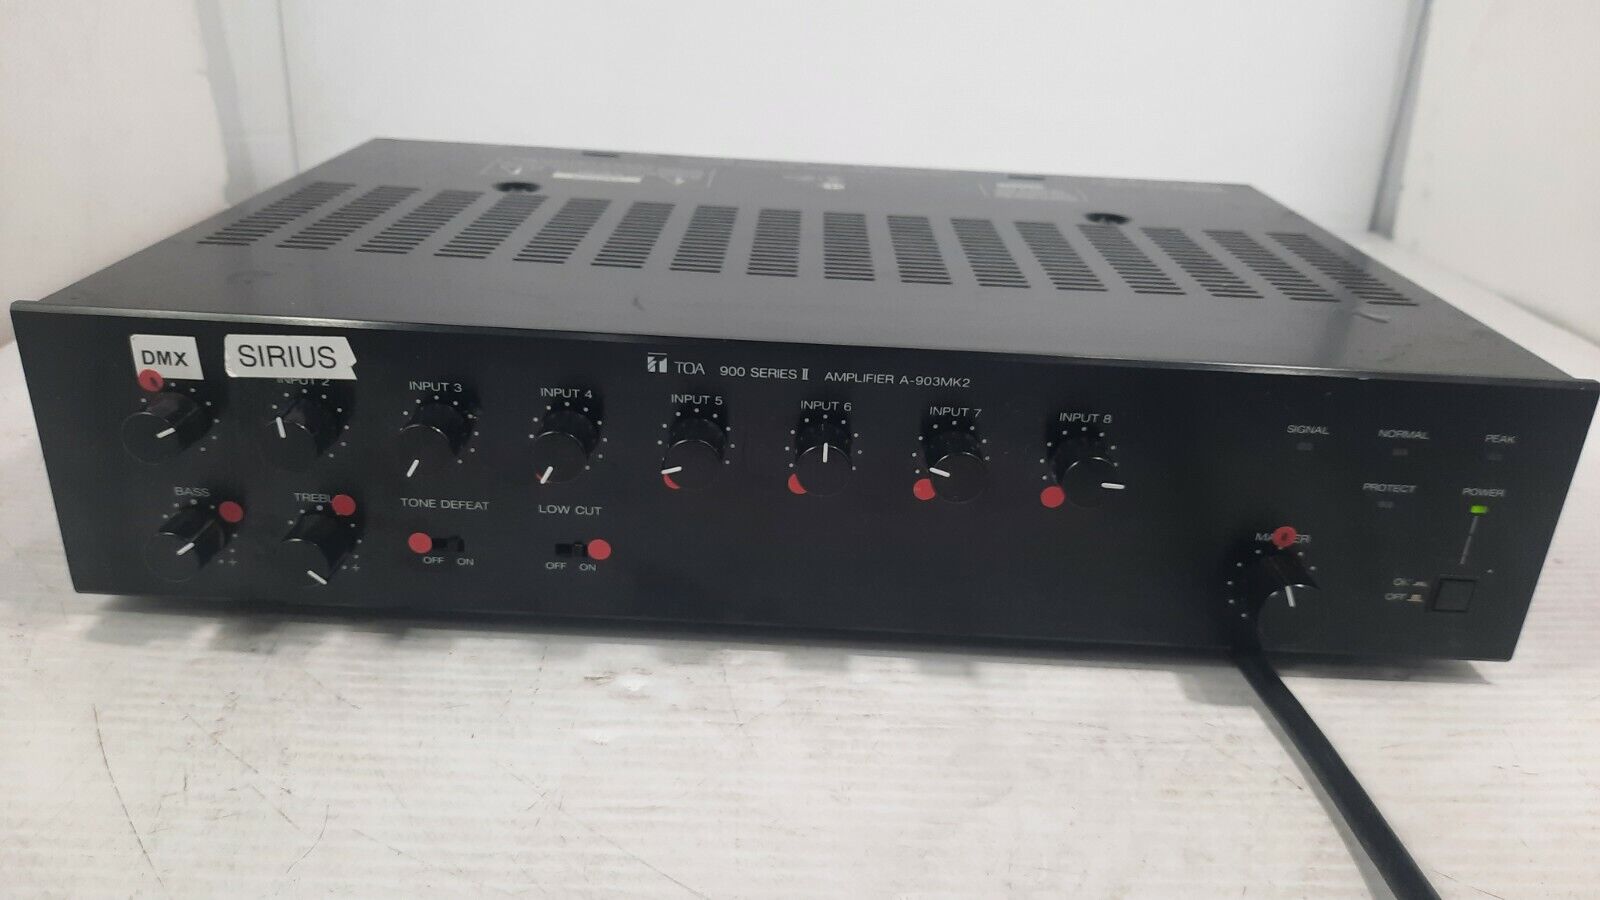 TOA 900 Series II Amplifier A-903MK2 ●●TESTED■■